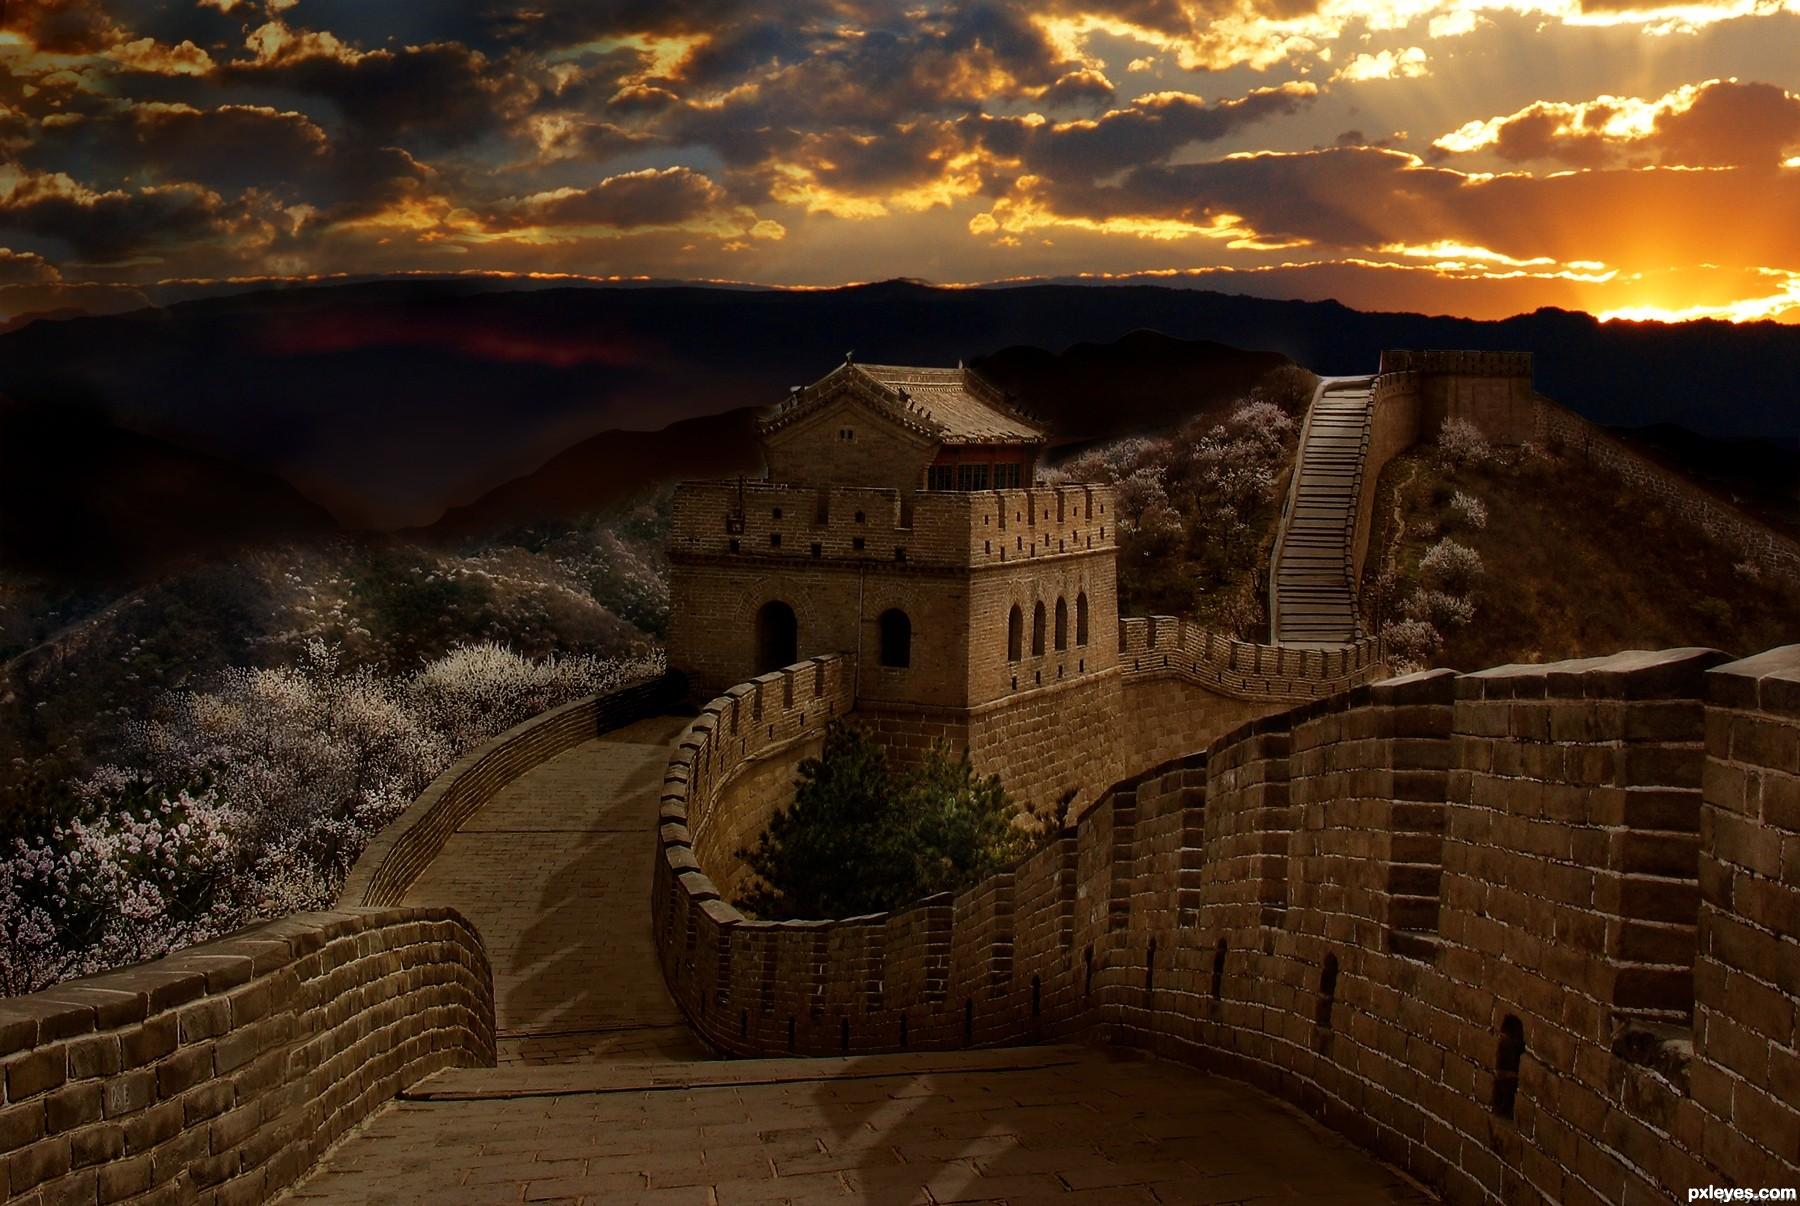 Great Wall at Sunset picture, by elemare for: the great wall